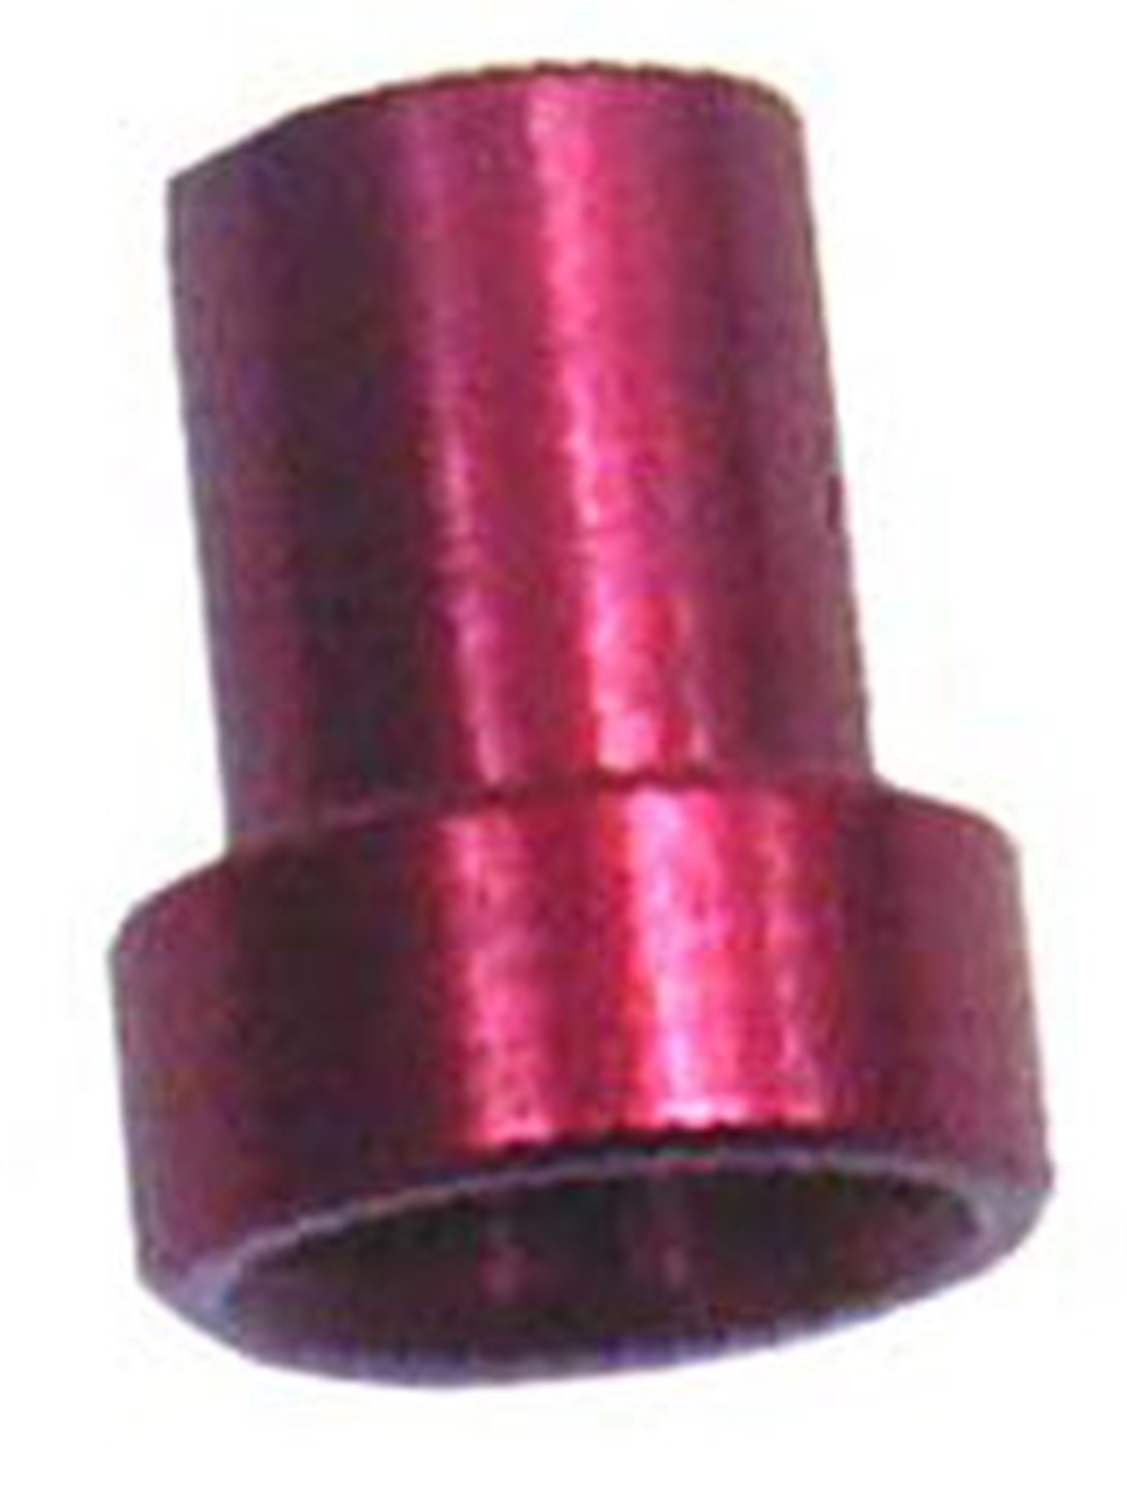 Fuel Hose Fitting, NOS Fittings NOS, 3AN X 3/16in. SLEEVE RED